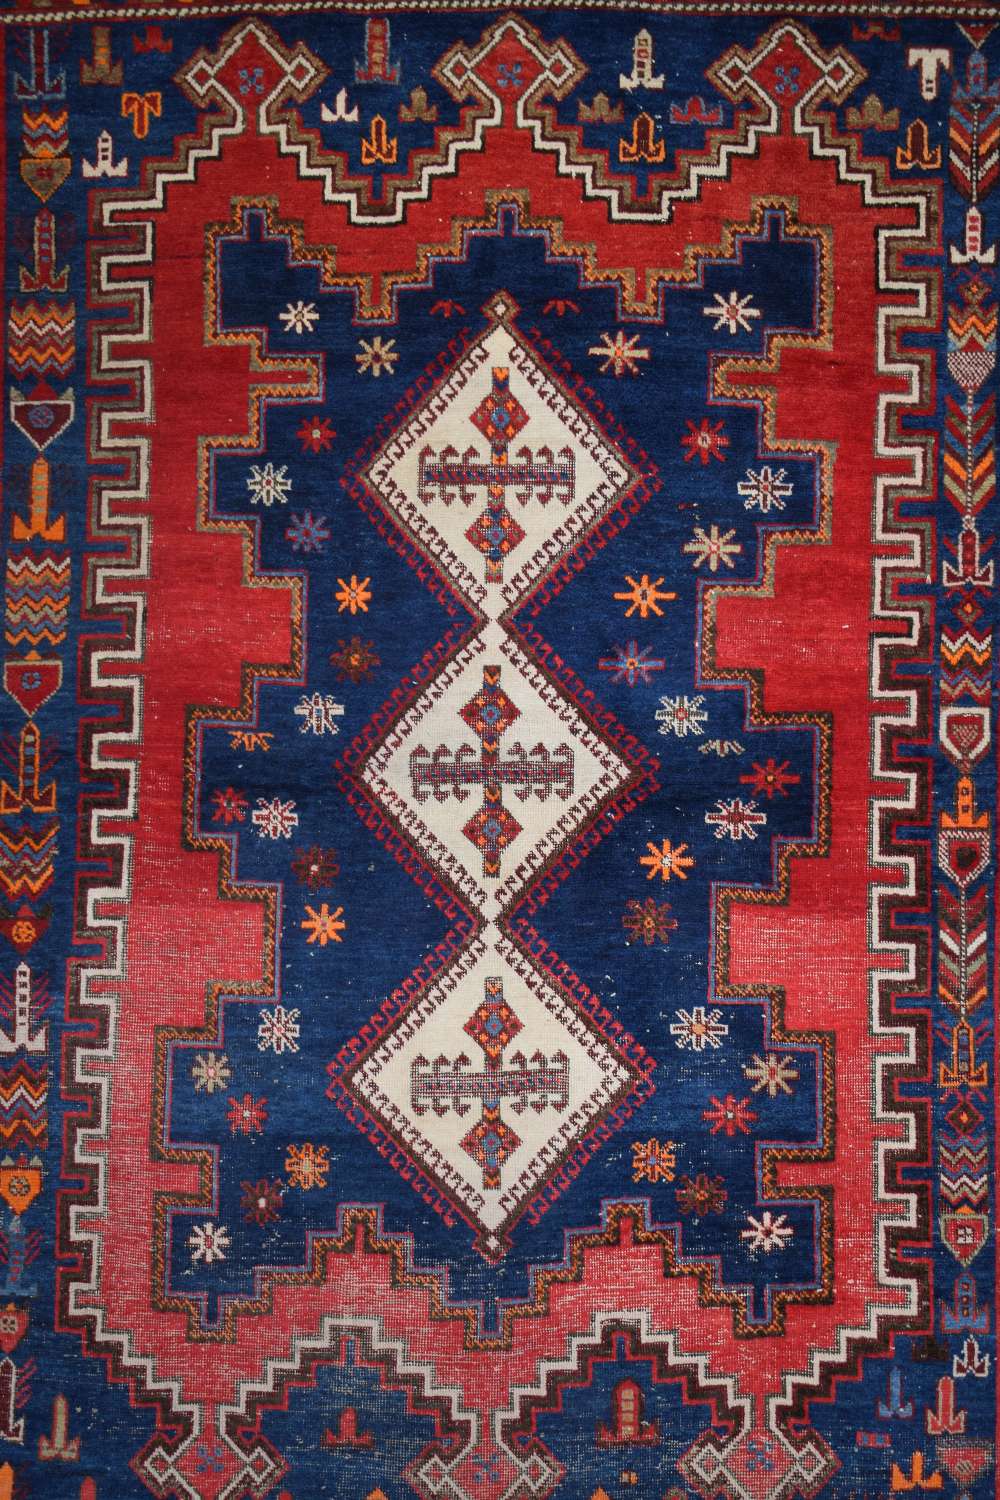 Afshar rug, Kerman area, south east Persia, circa 1930s-40s, 6ft. 8in. X 5ft. 1in. 2.03m. X 1.55m. - Image 8 of 9